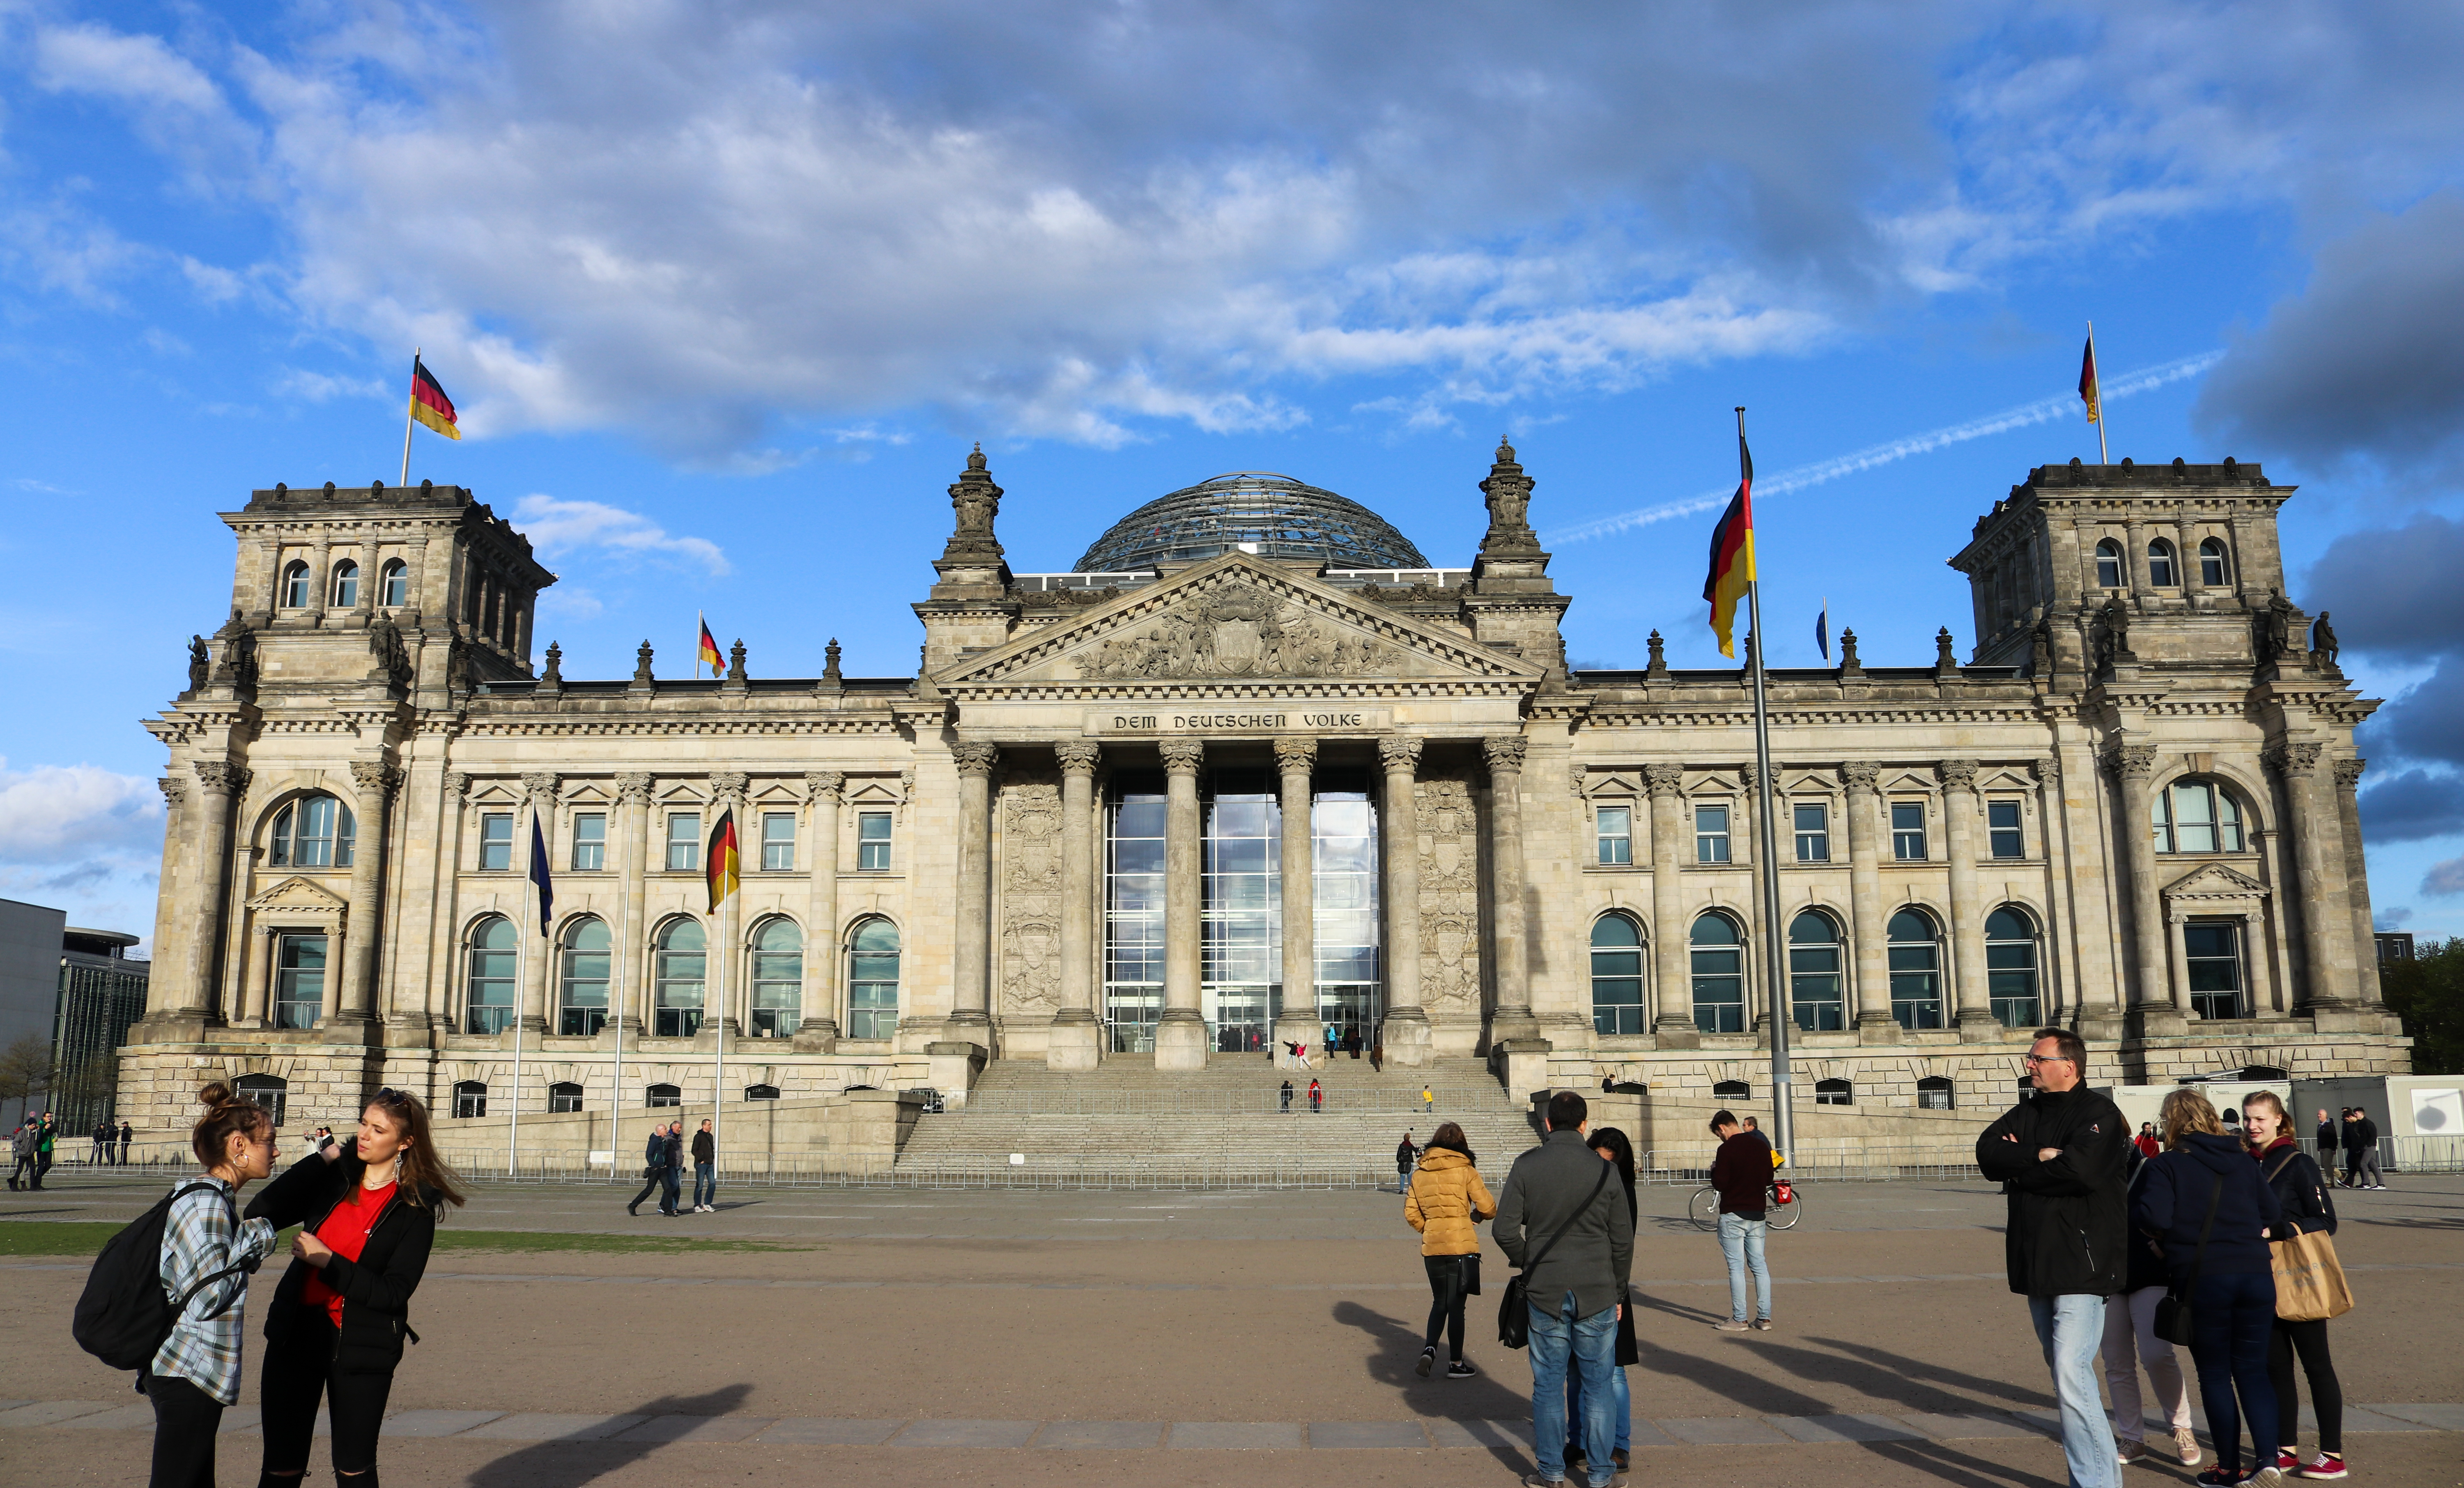 Parliament of Germany (photo credit: Joan/flickr)